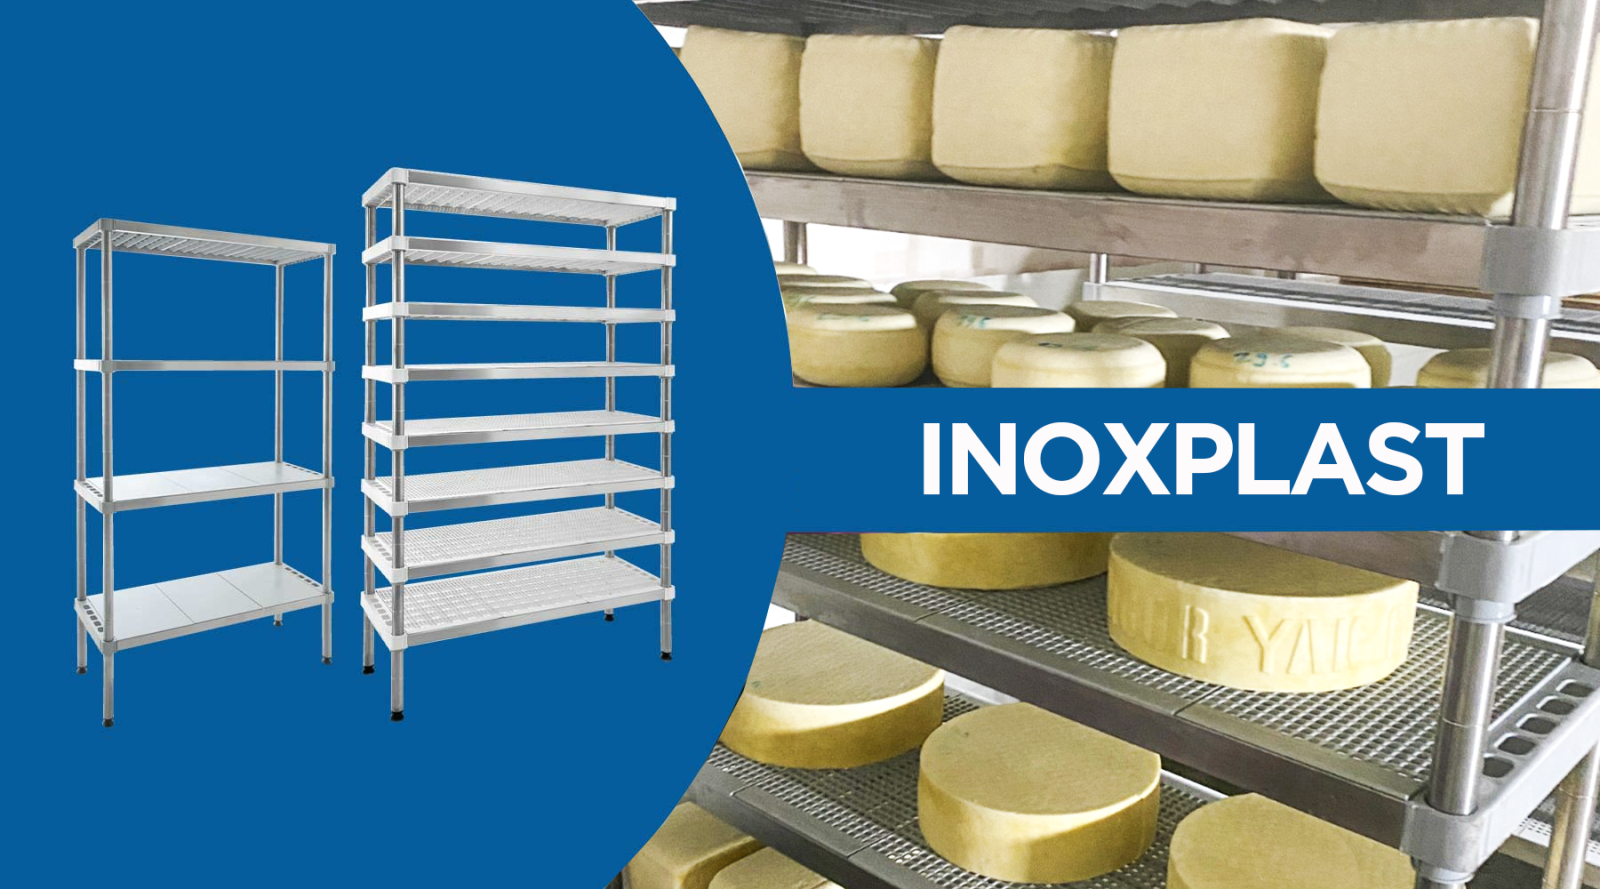 Steel and plastic shelves for cheese maturing